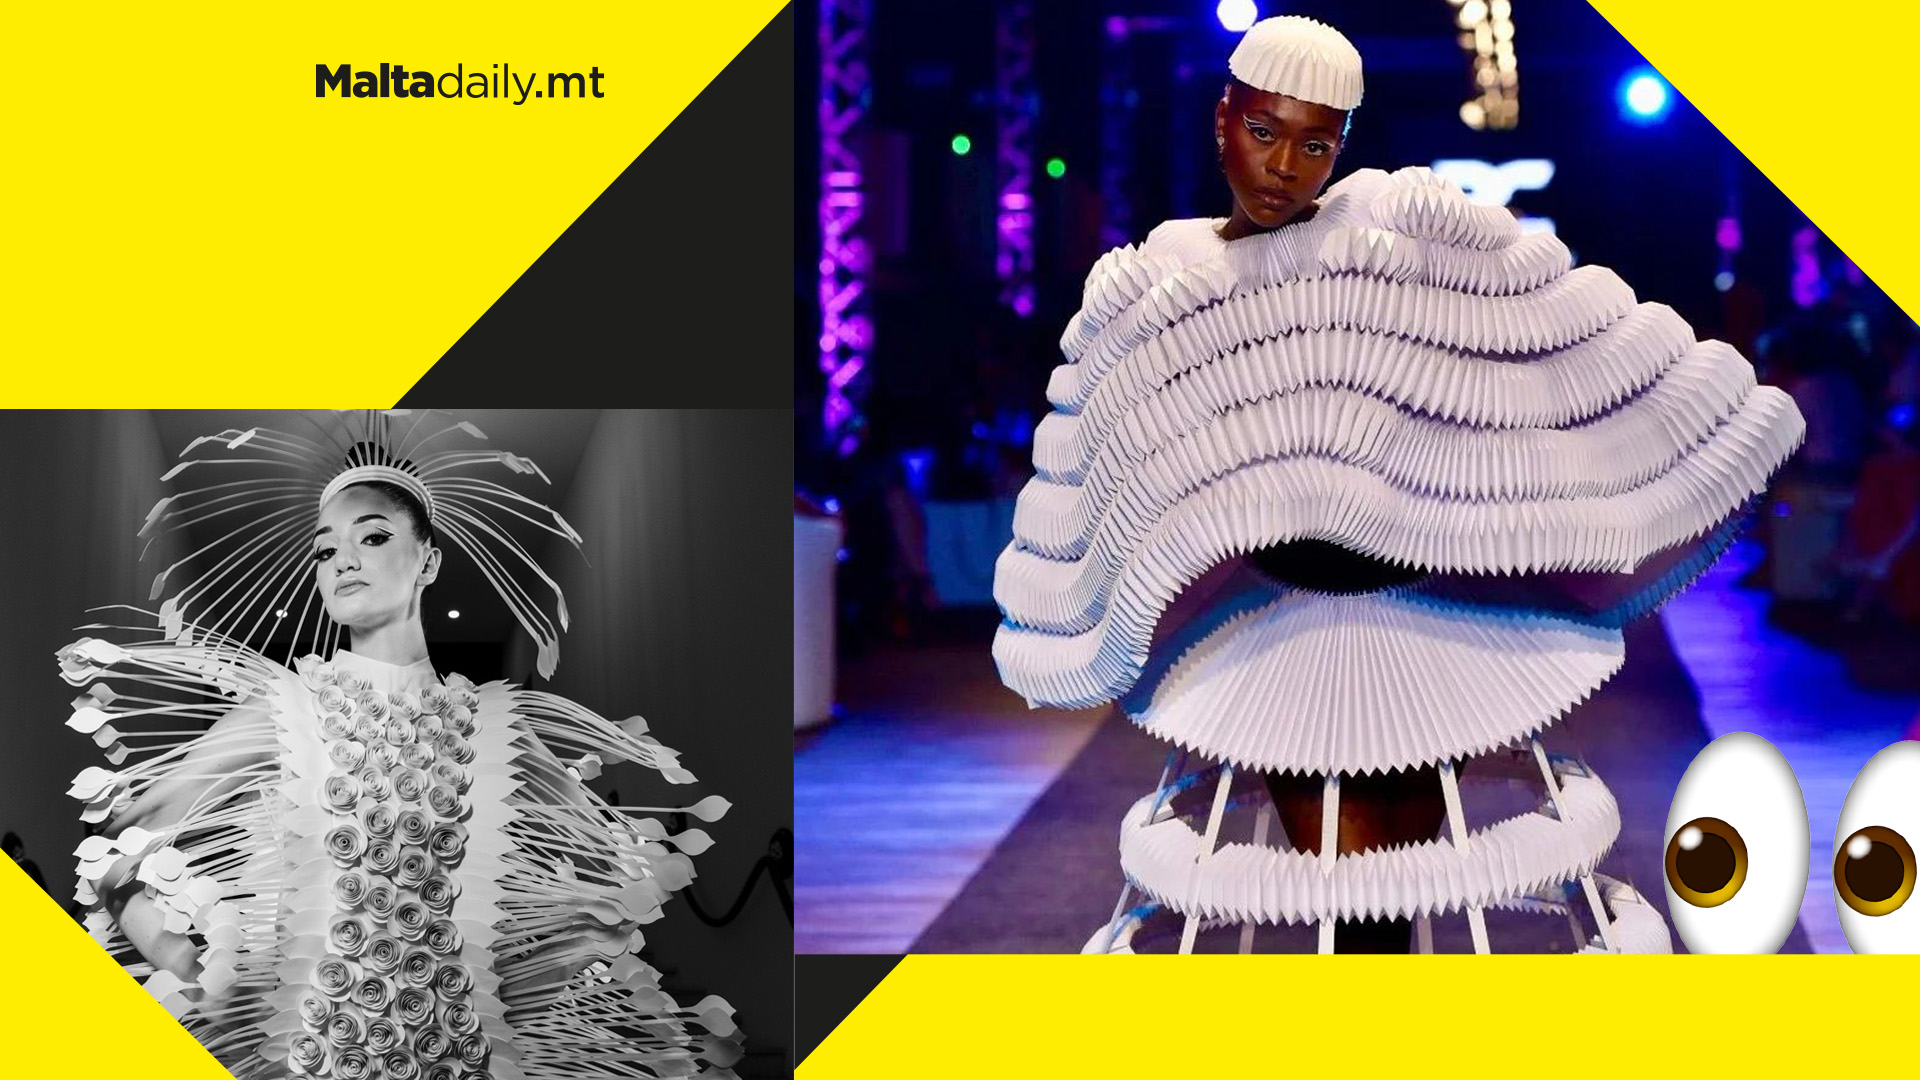 Paper dresses steal the show at Malta Fashion Week as Maltese designer reveals inspiration